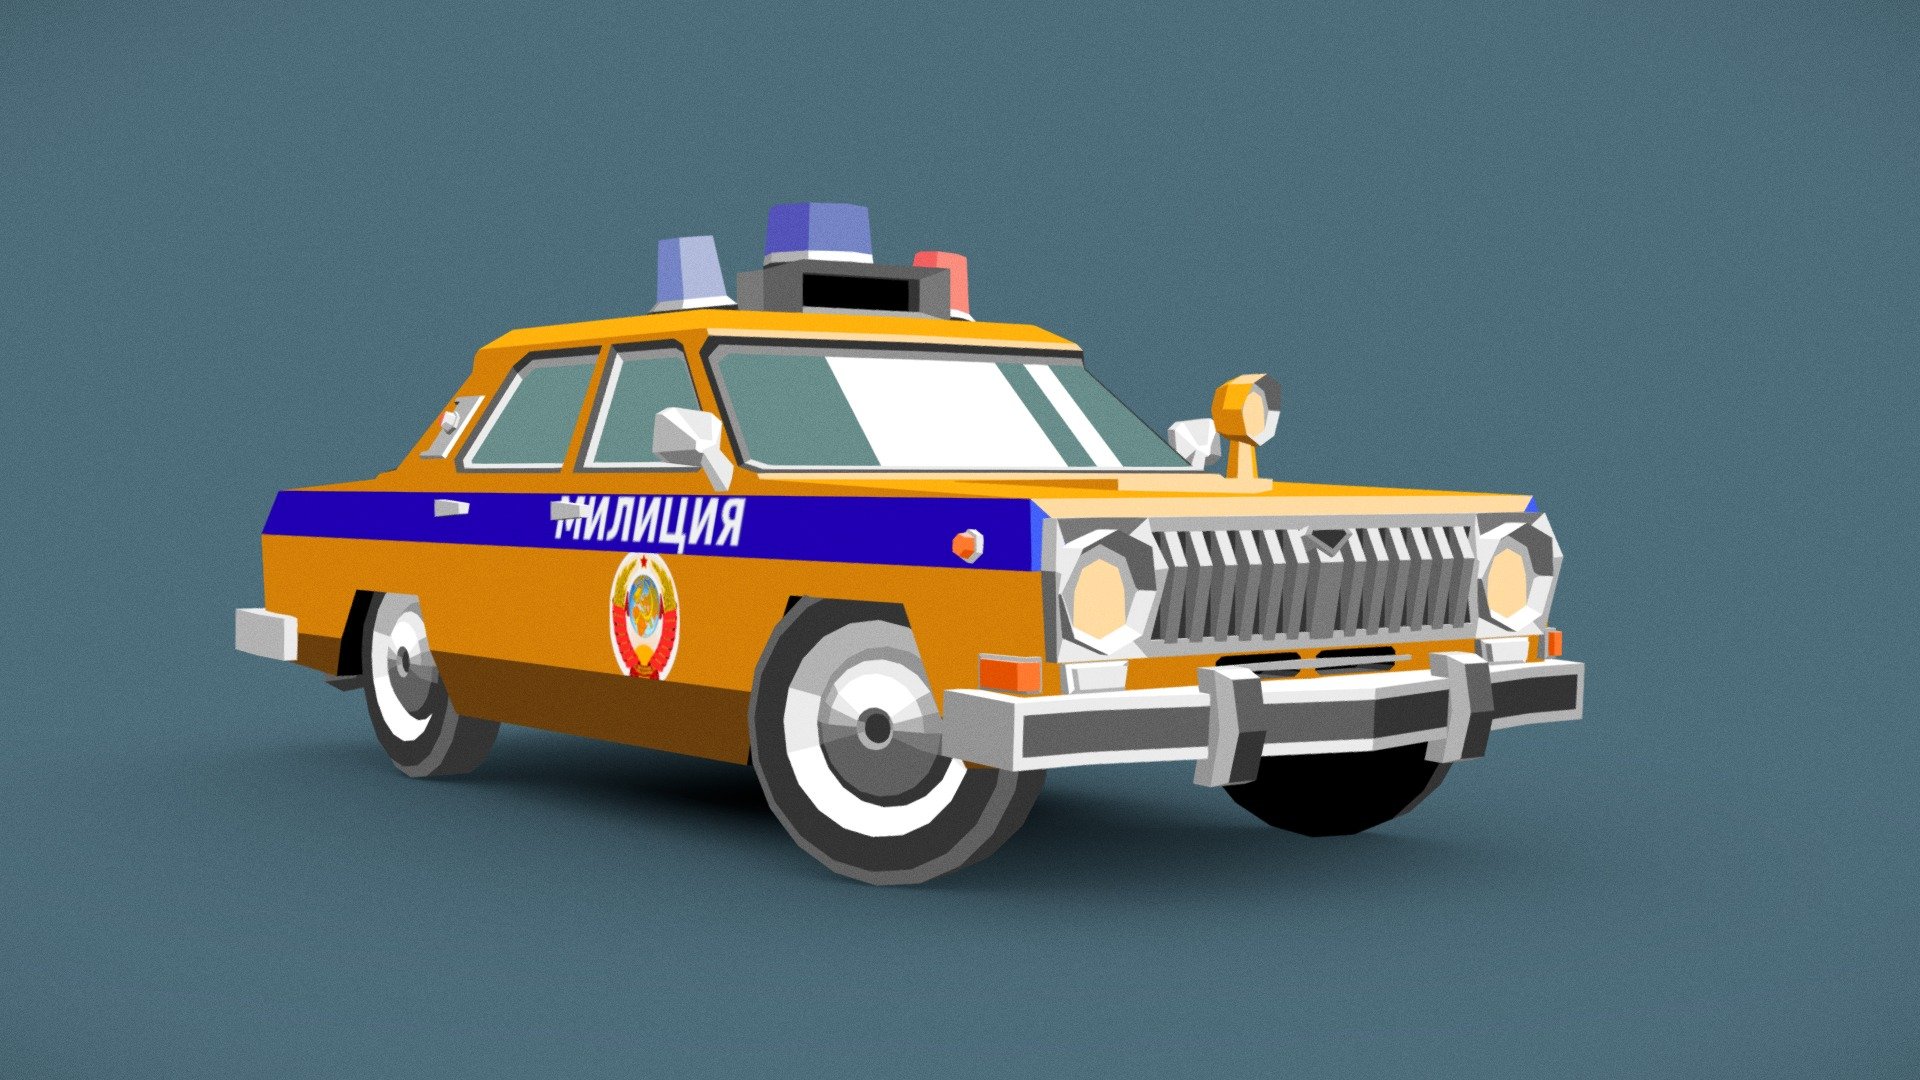 Low poly model of a GAZ-24 “Volga” Traffic Police car.

The GAZ-24 “Volga” is a car manufactured by the Gorkovsky Avtomobilny Zavod (GAZ, Gorky Automobile Plant) from 1970 to 1985 as a generation of its Volga marque. Belgian-assembled re-badge models were sold as the Scaldia-Volga M24 and M24D for the Western European market 3d model